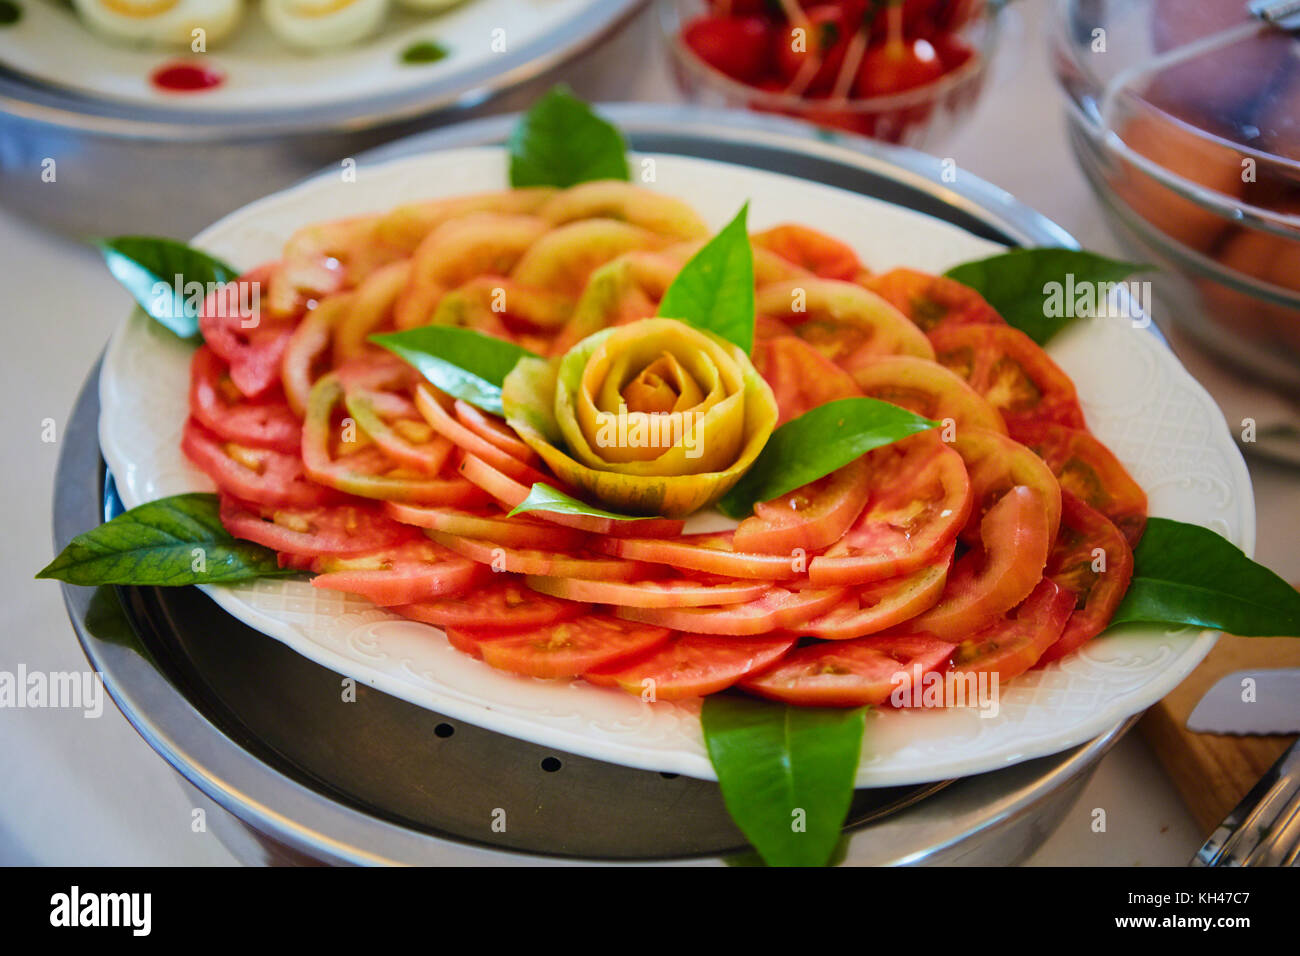 Close Up View of Slices of Fresh Tomato arranged on a Plate Artfully, Positano, Italy Stock Photo